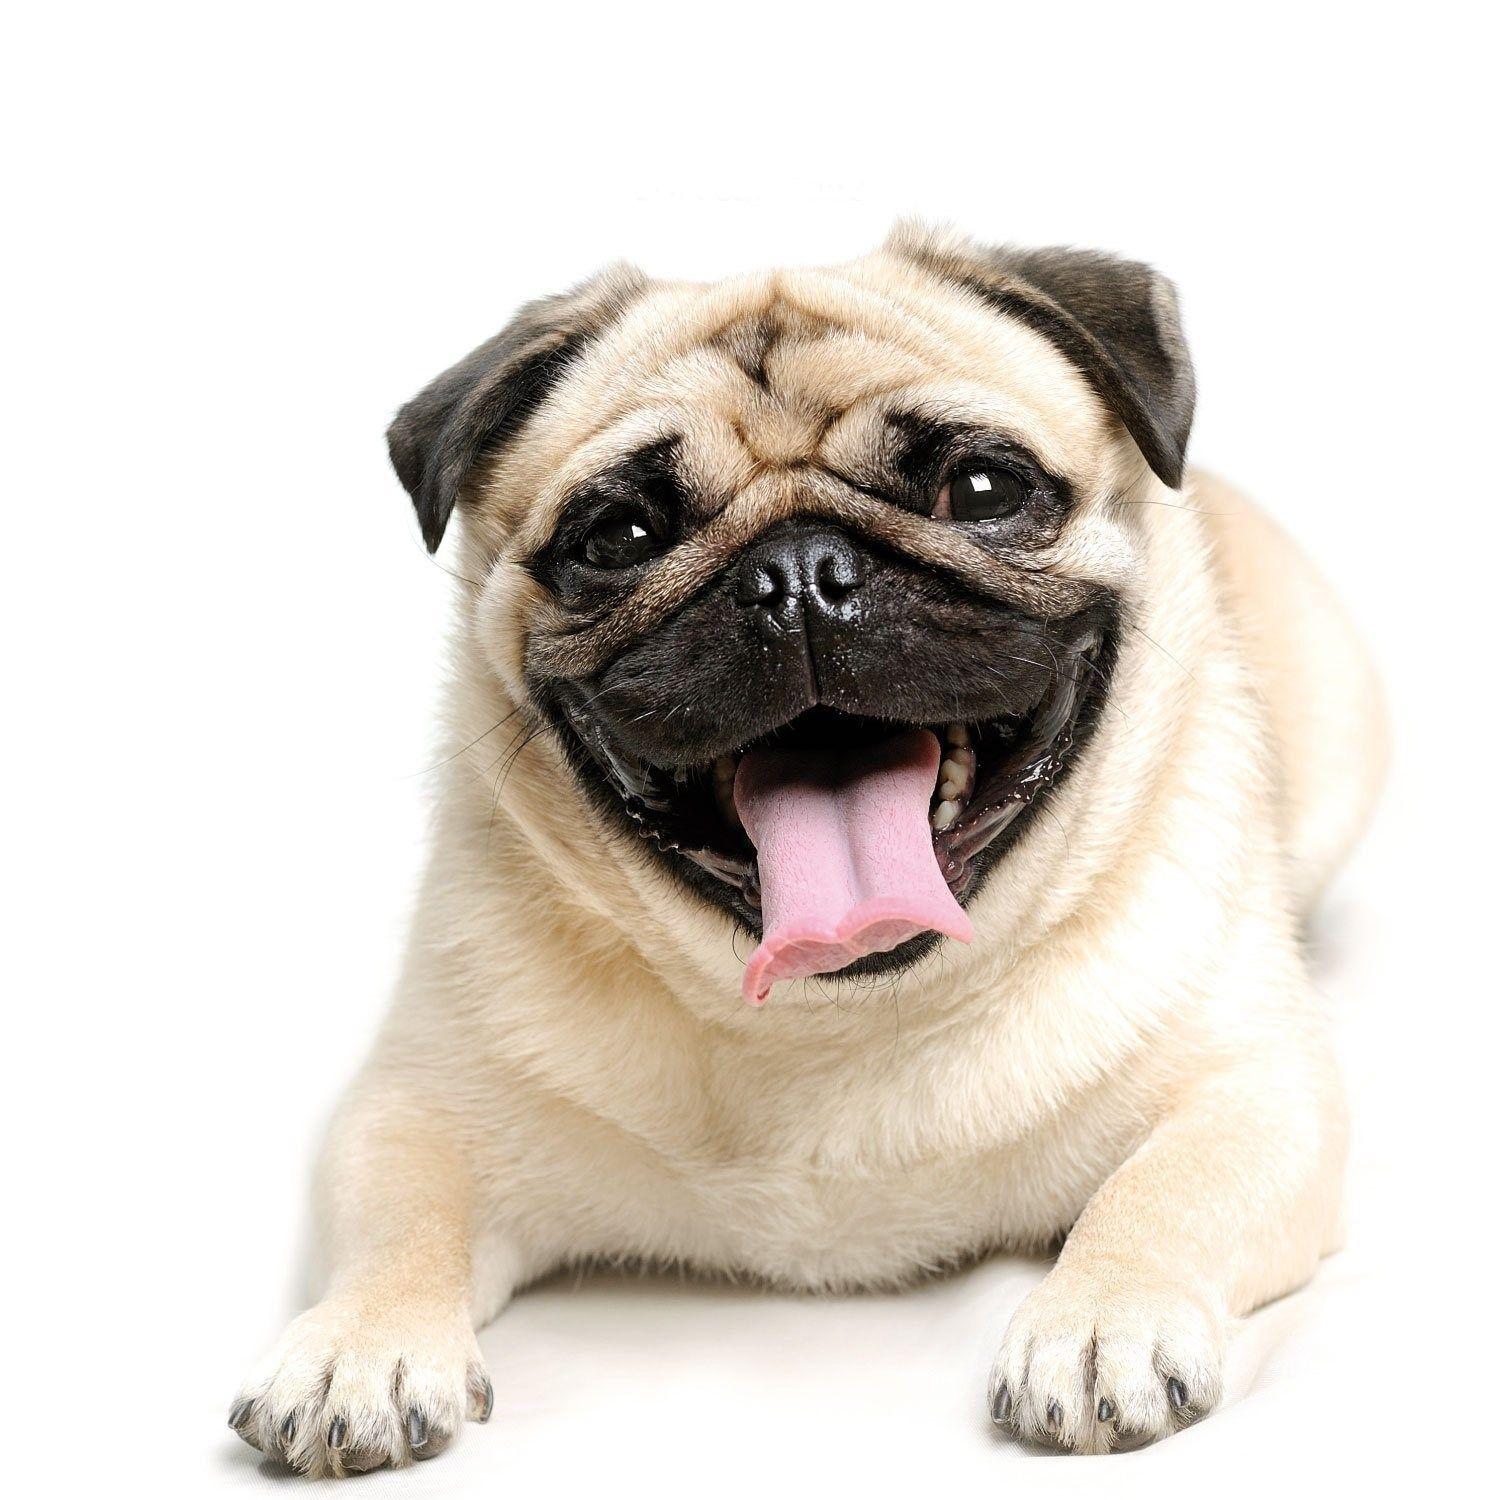 Pug Wallpaper, Screensaver, Background. List of small dogs, Pugs